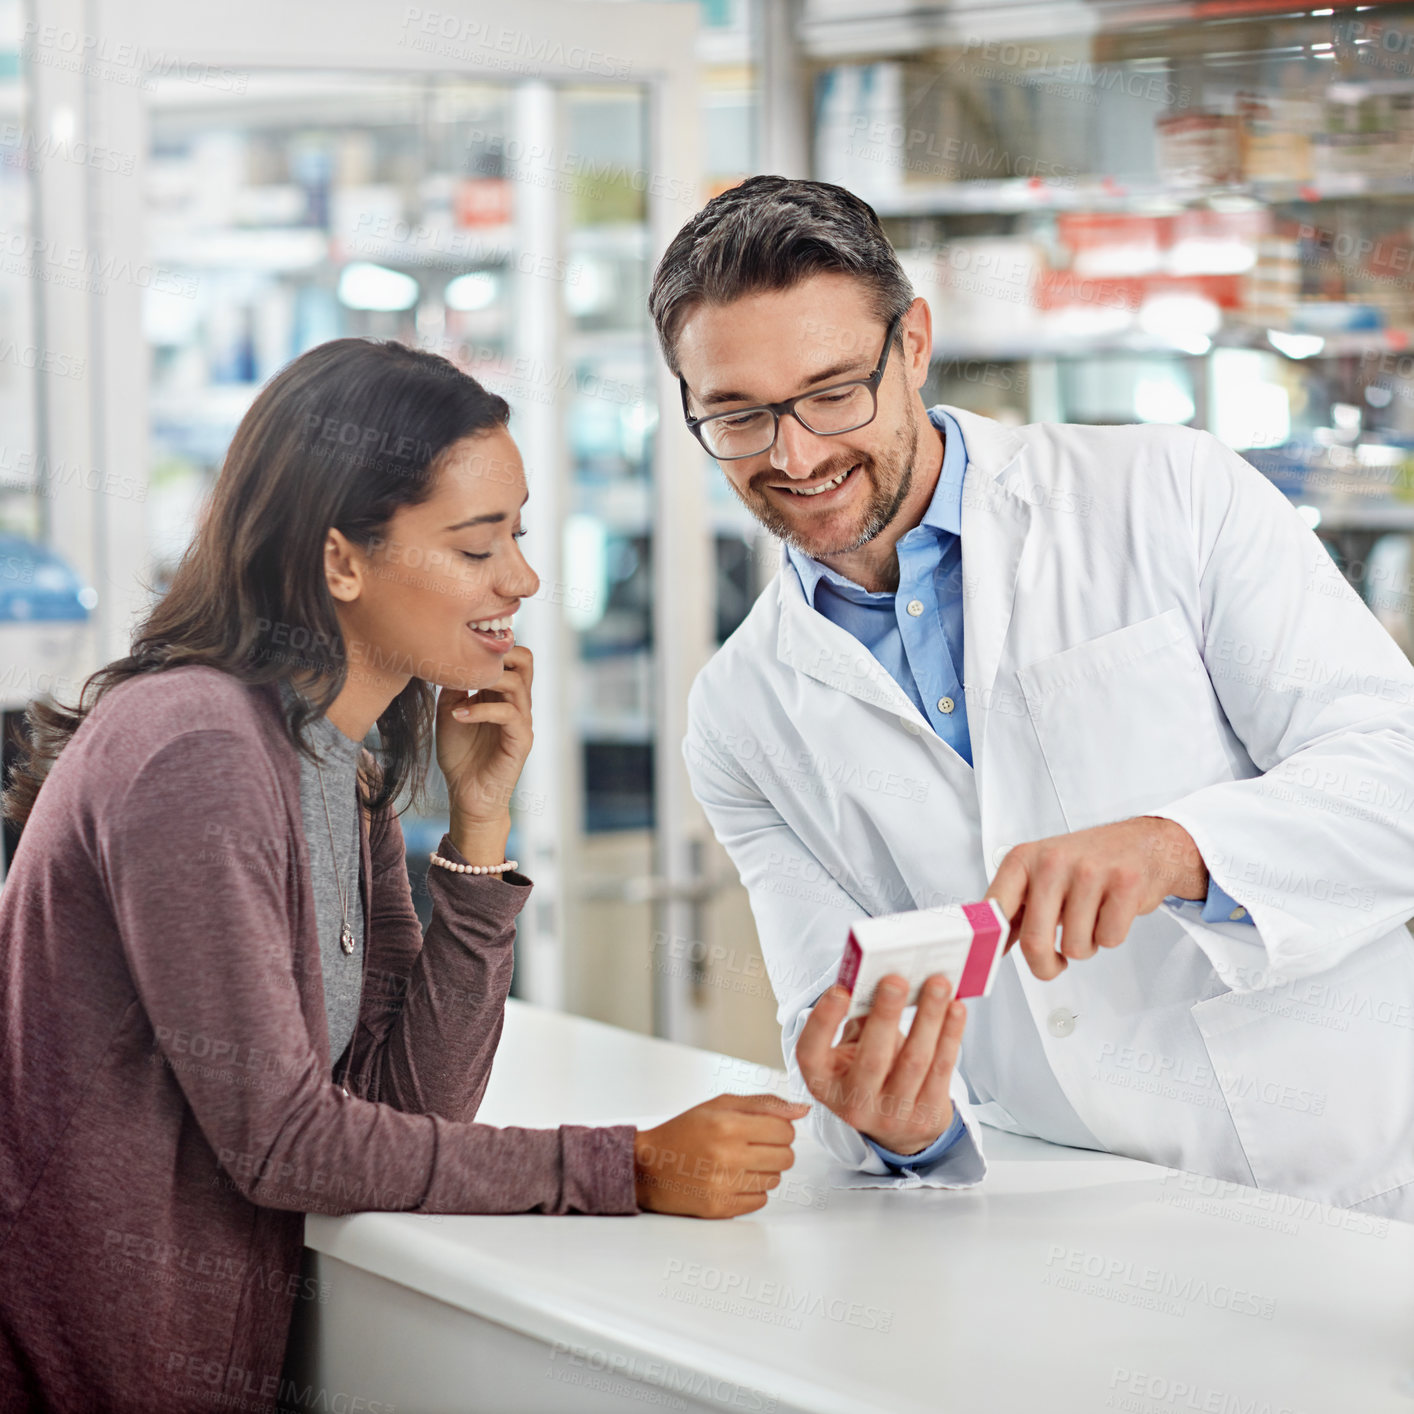 Buy stock photo Shot of a male pharmacist assisting a customer at the prescription counter. All products have been altered to be void of copyright infringements